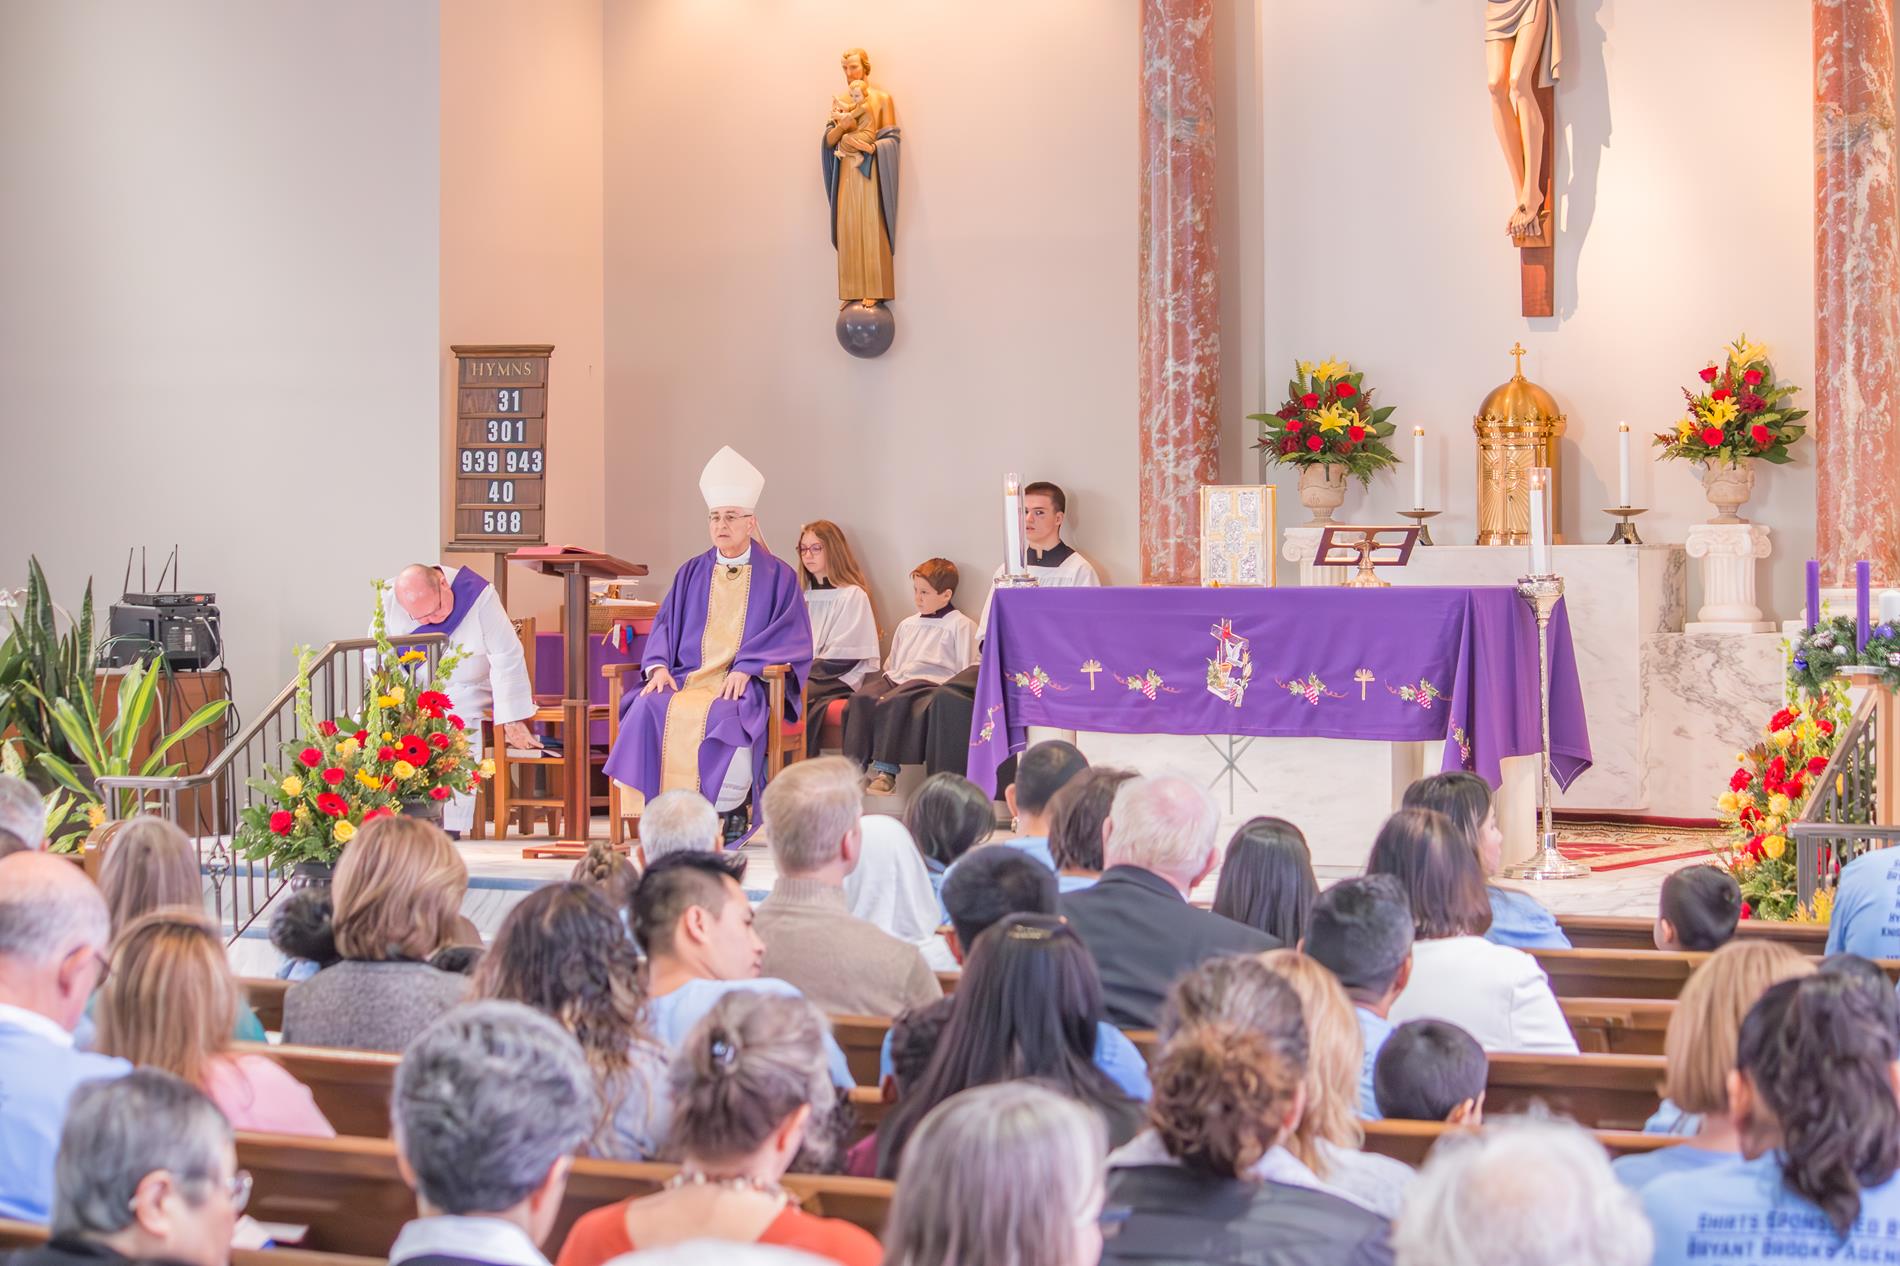 View of celebrants and altar